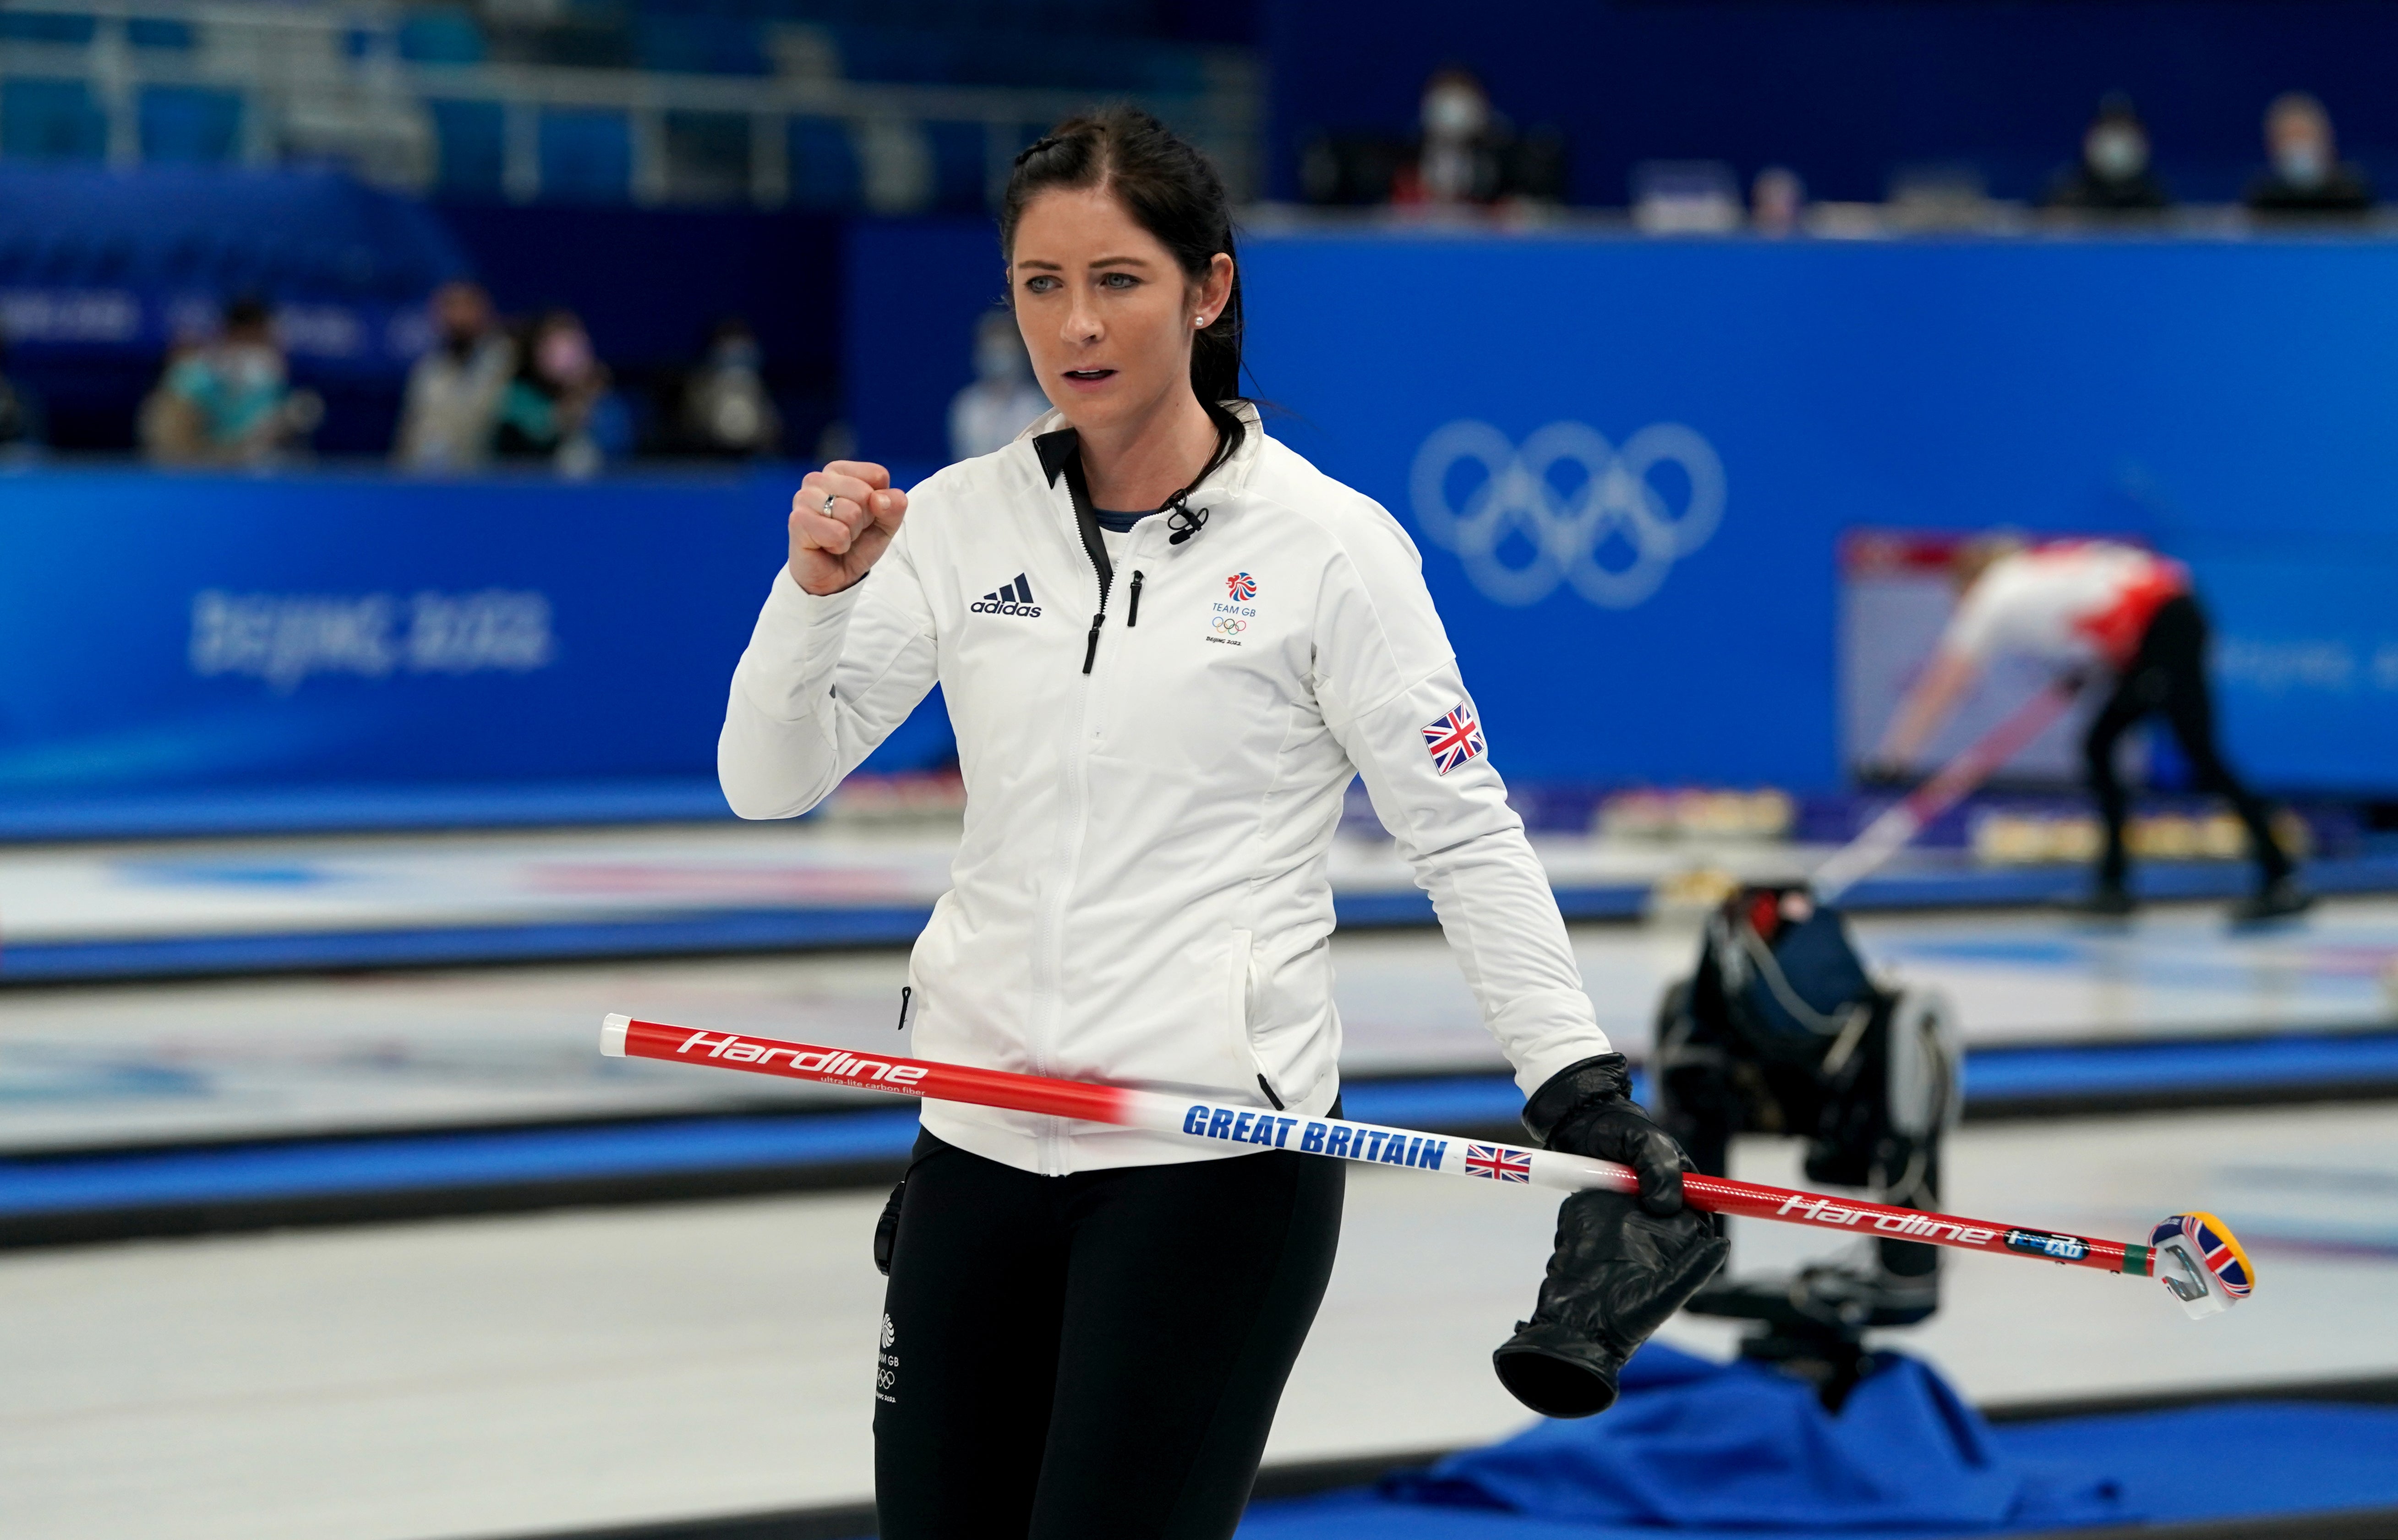 Winter Olympics closing ceremony LIVE Team GB women win first gold medal in curling as Beijing Games end The Independent